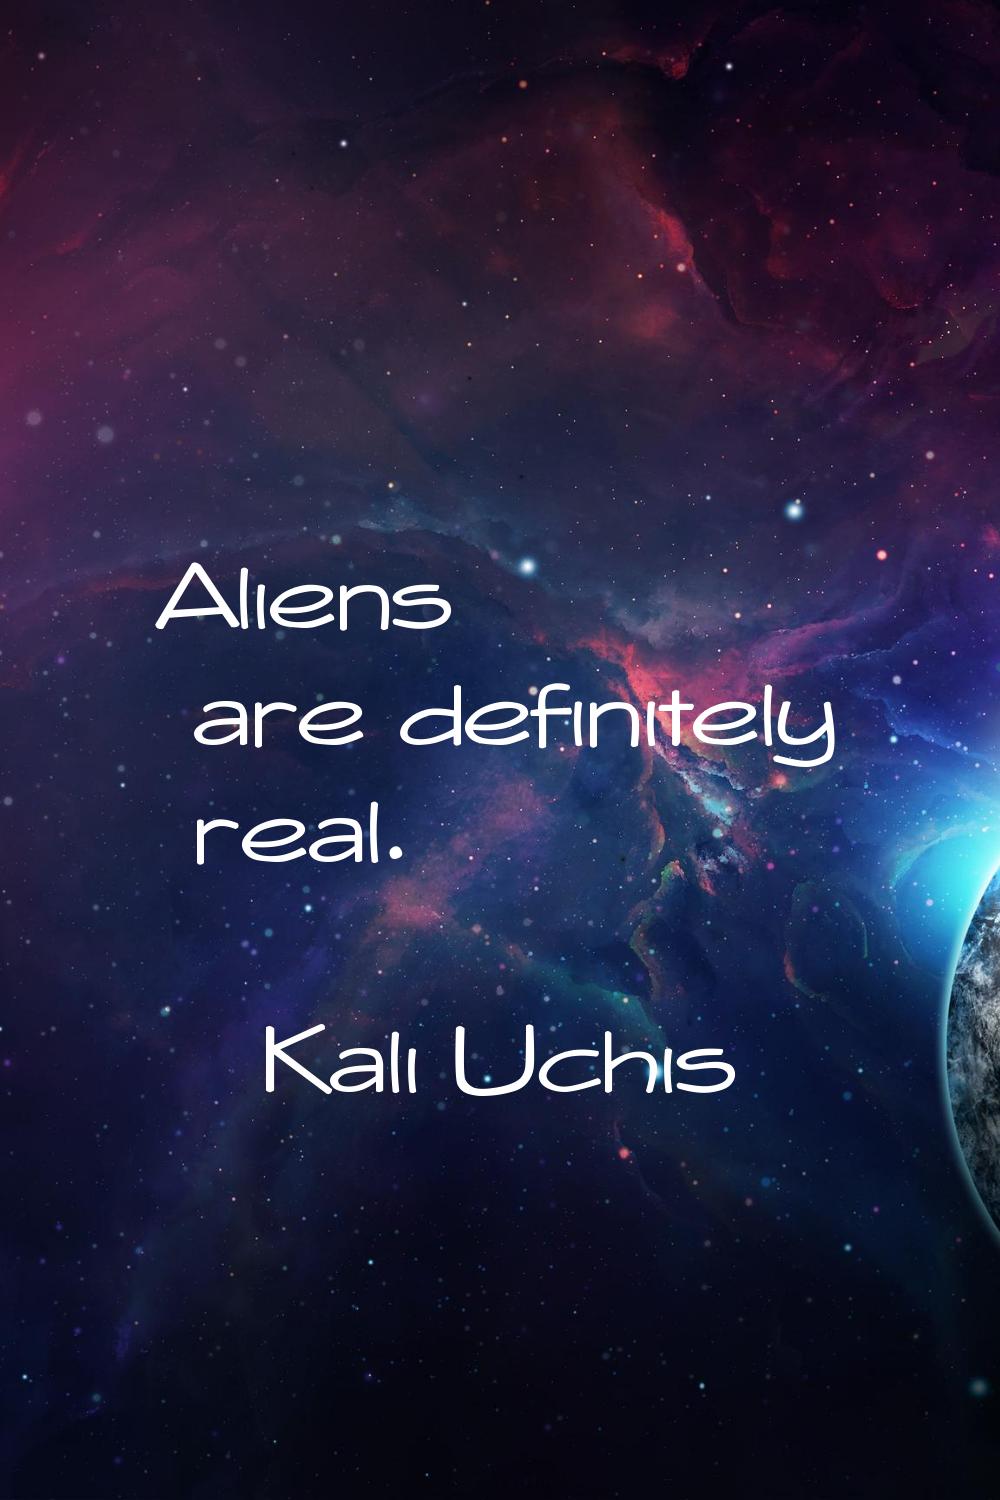 Aliens are definitely real.